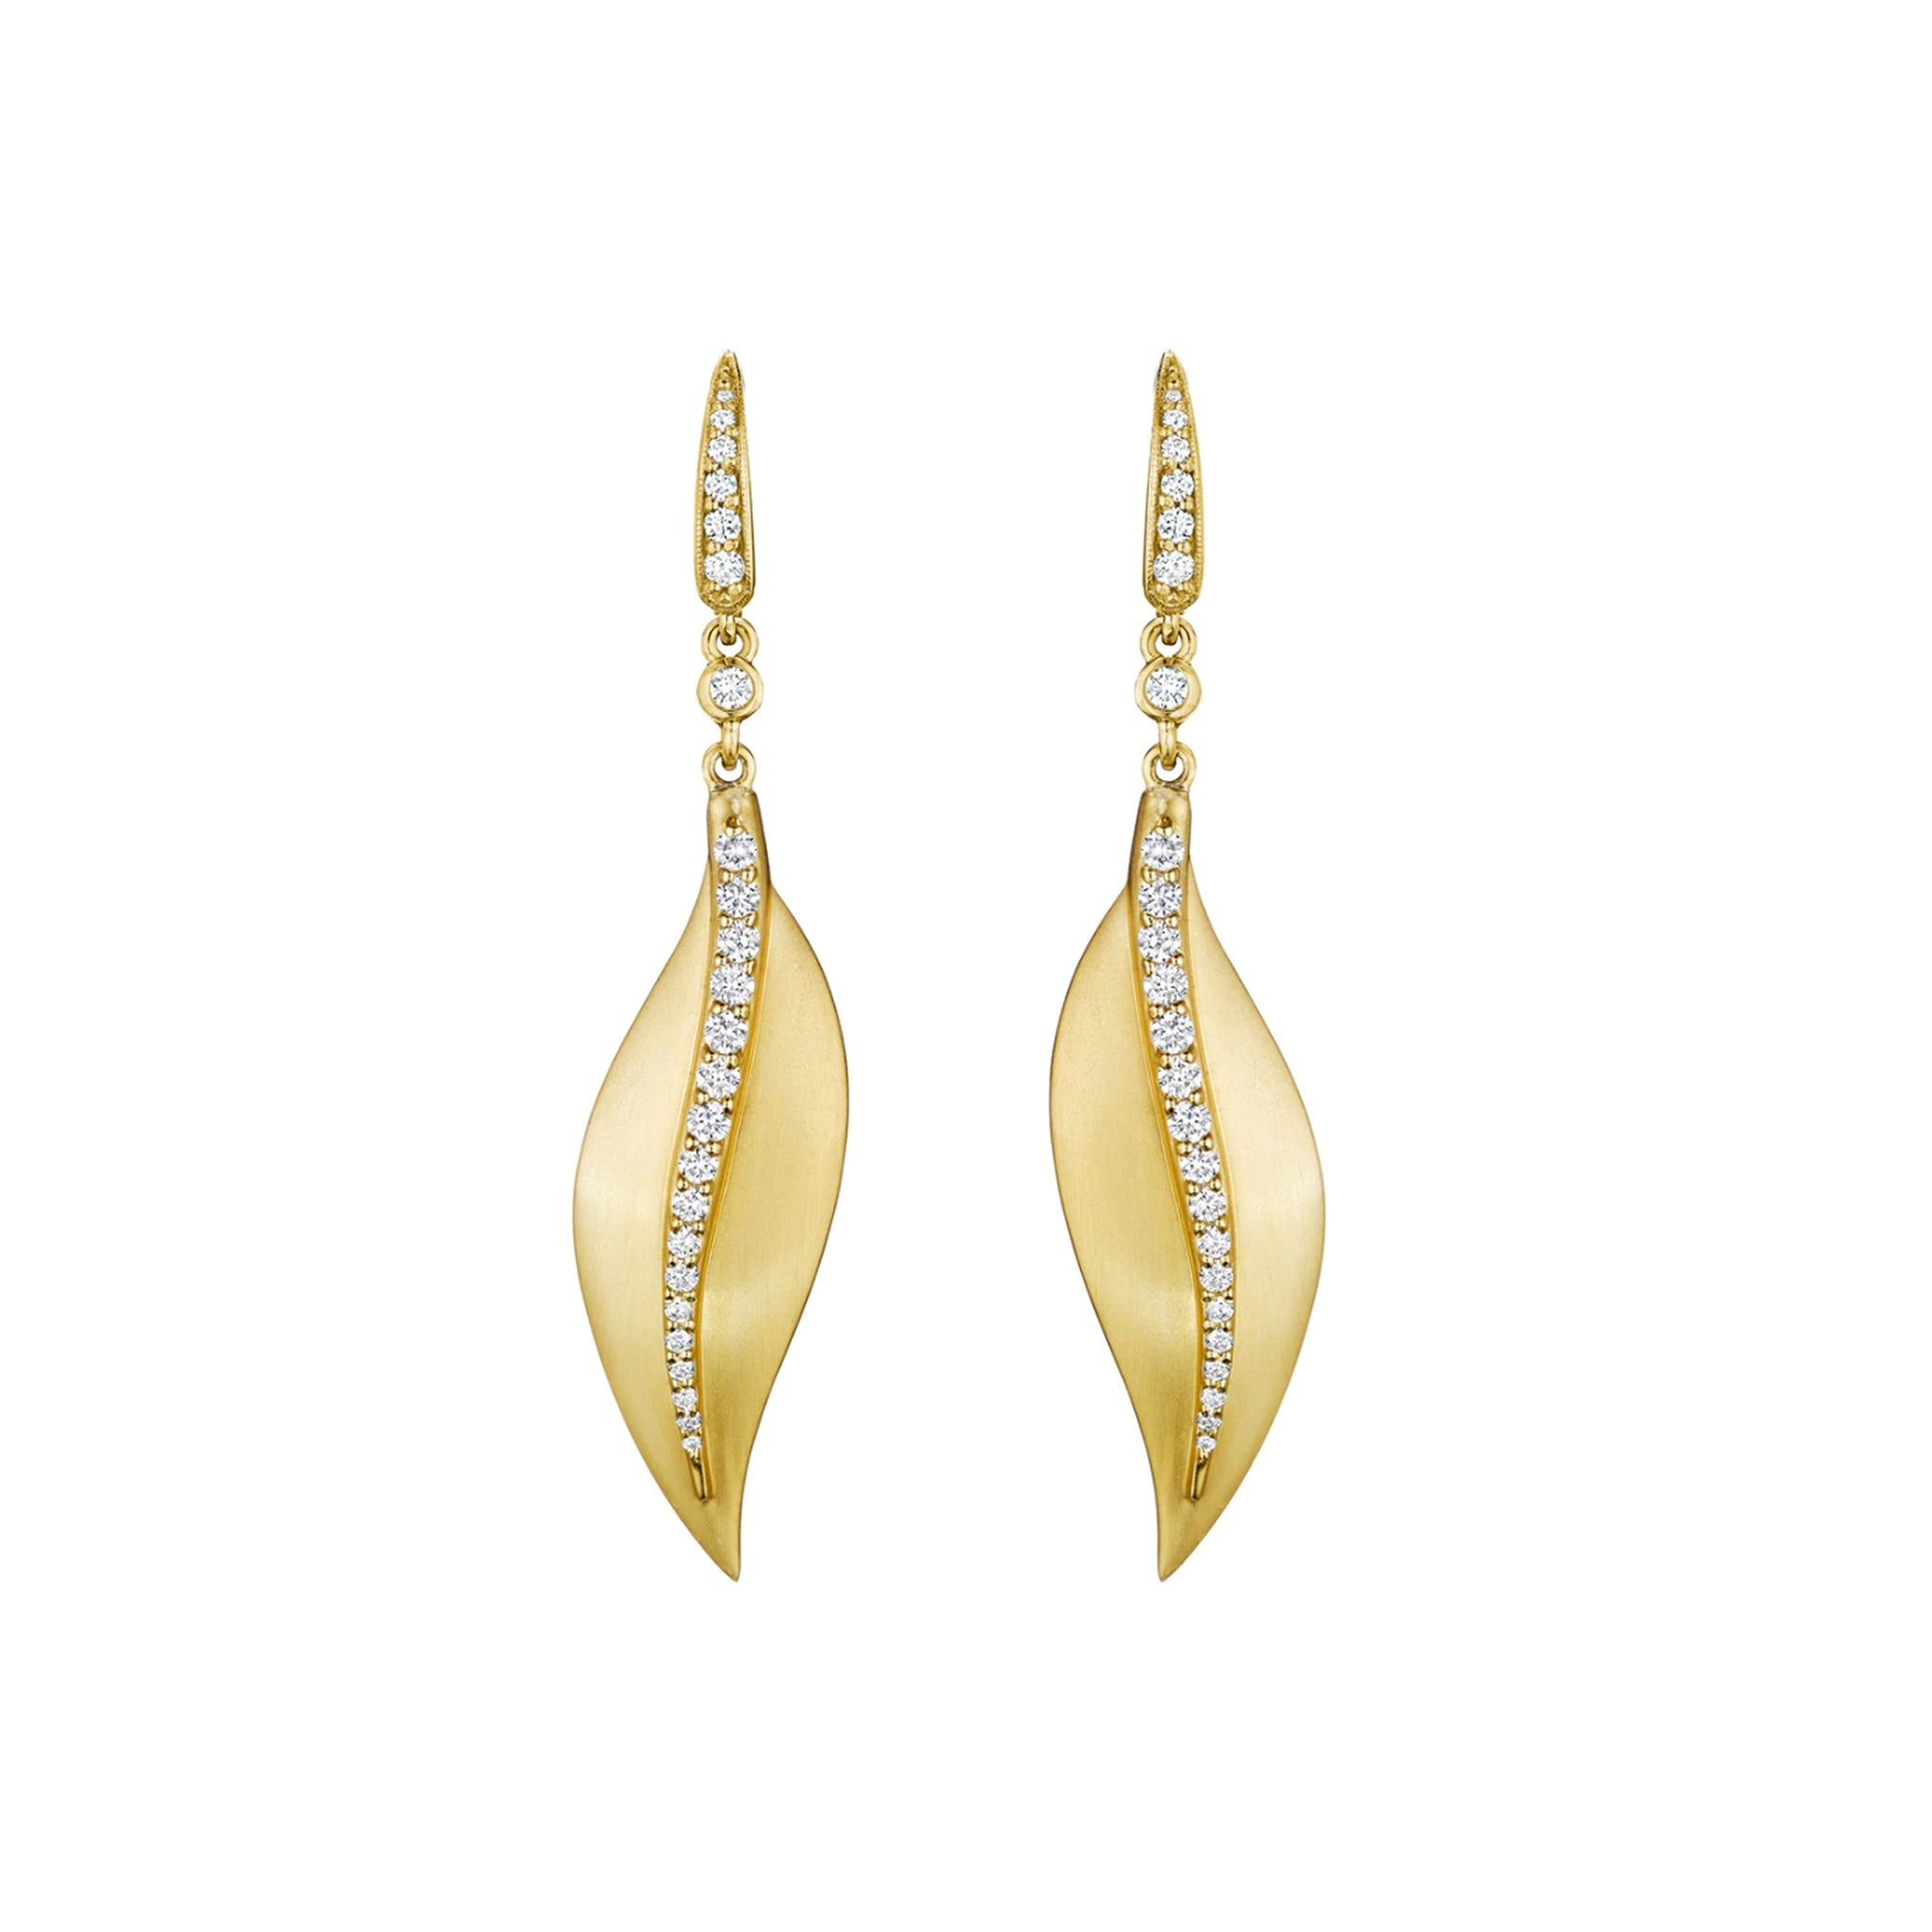 Penny Preville gold and diamond leaf drop earrings - Be On Park